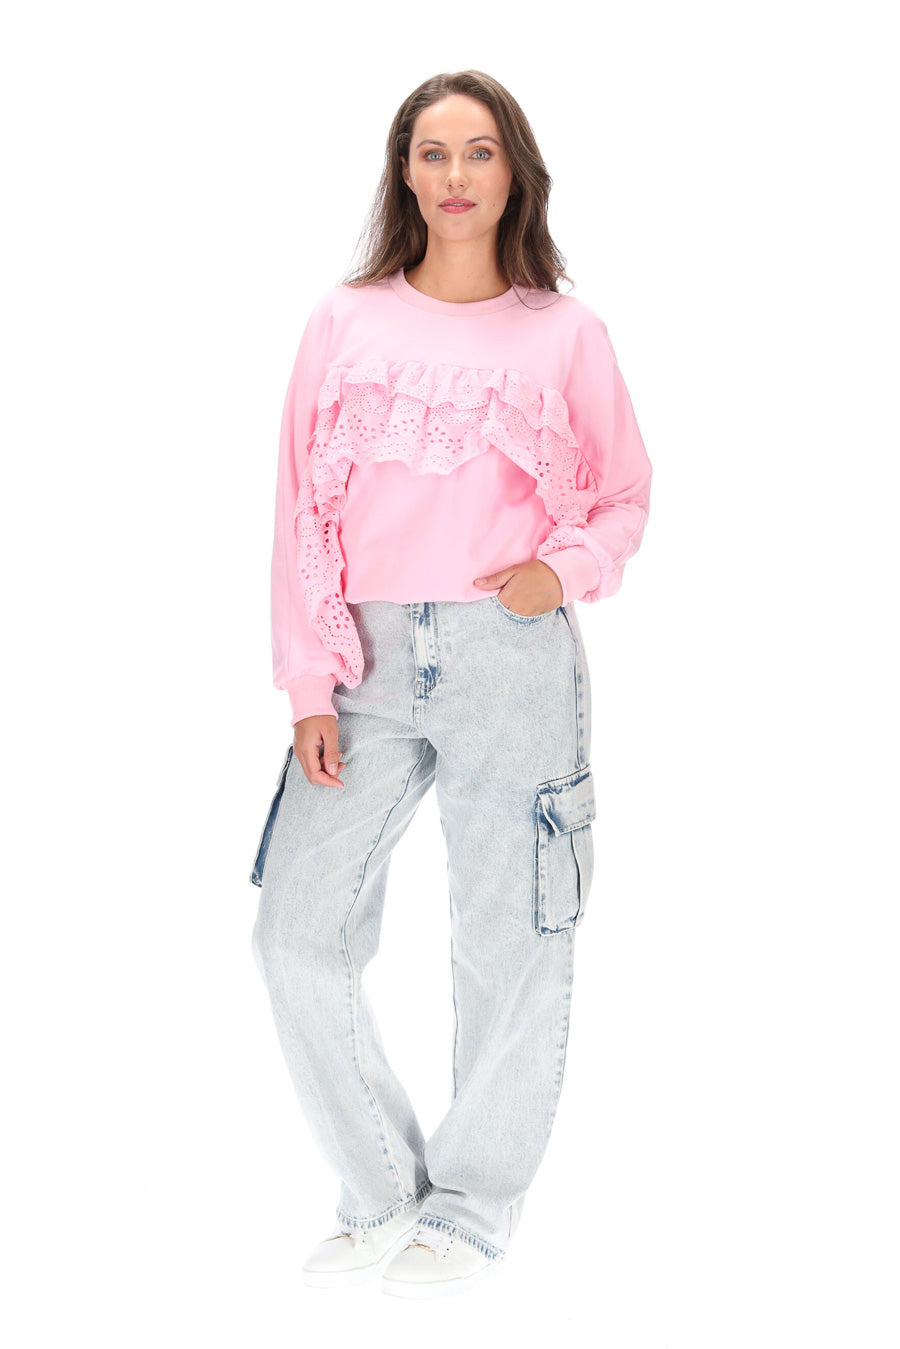 Charlo Lucy Sweater